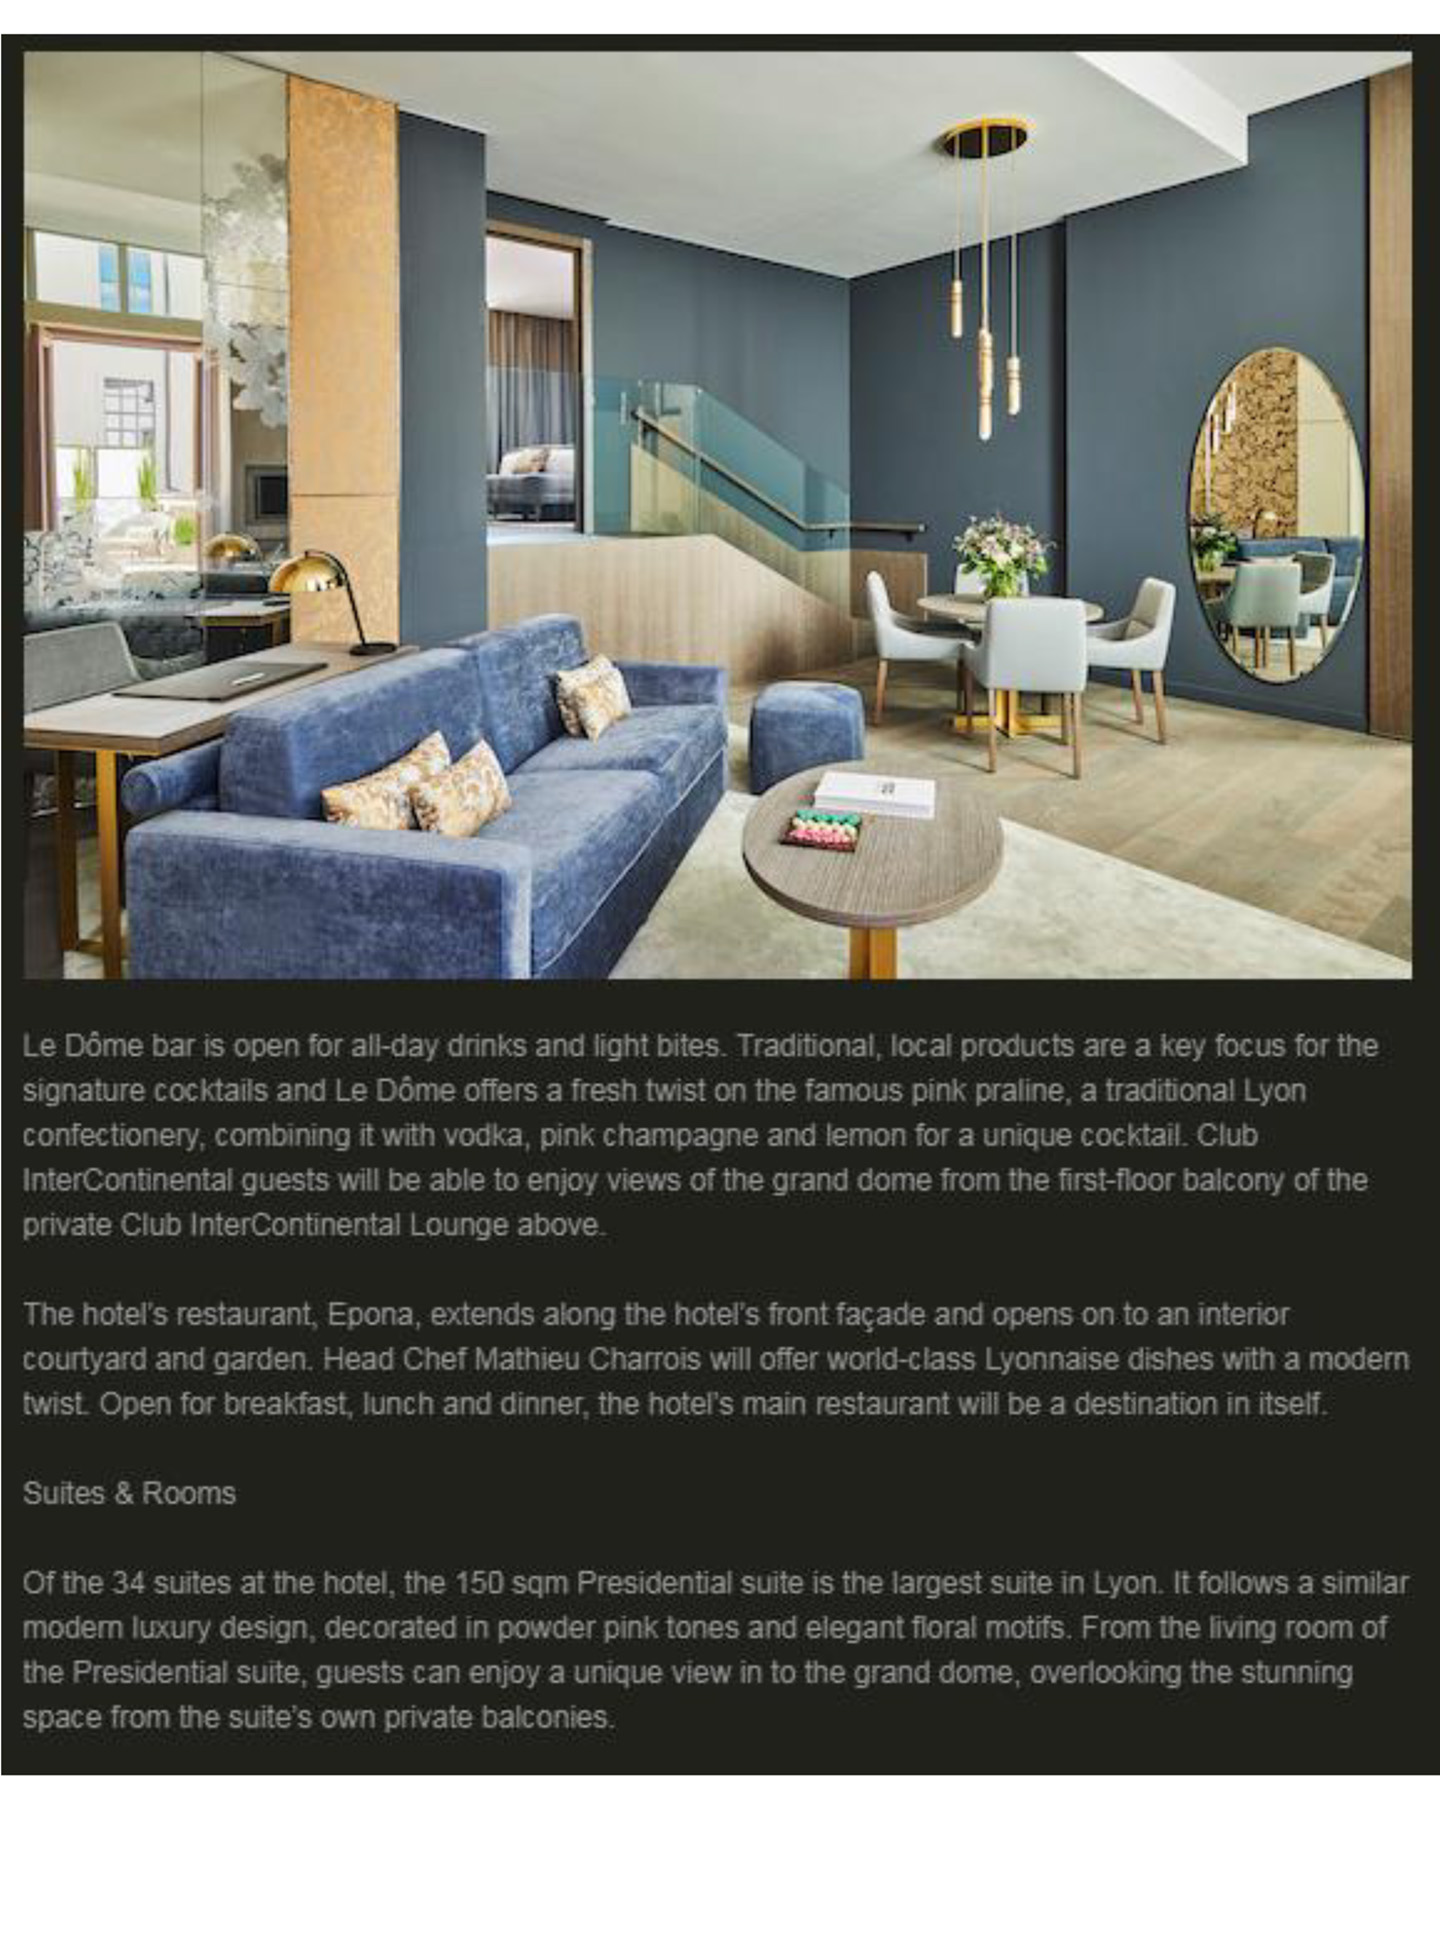 Article on the InterContinental Lyon Hotel Dieu realized by the studio jean-Philippe Nuel in the rooms magazine, new luxury hotel, luxury interior design, historical heritage